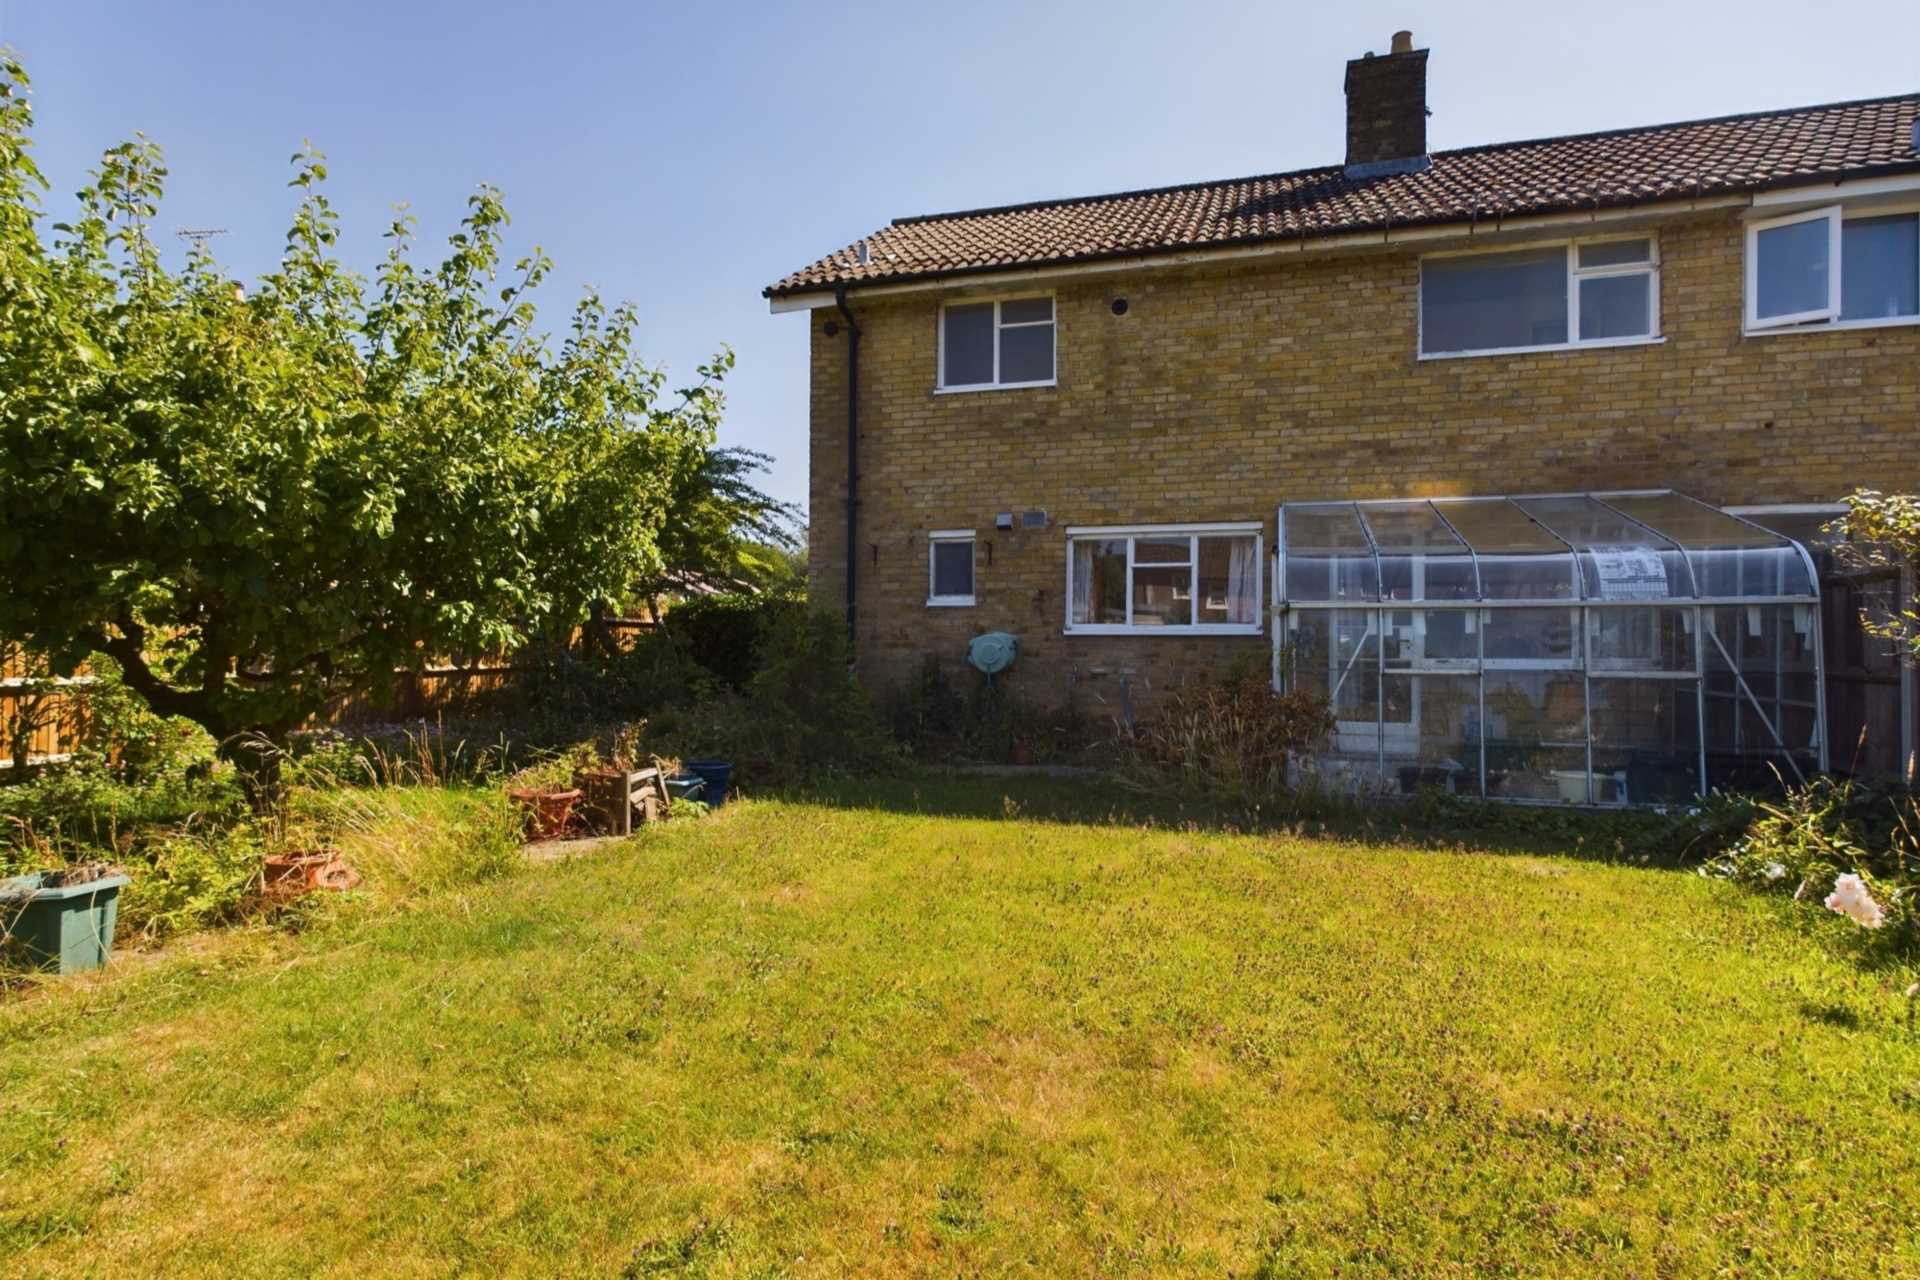 3 BED WITH GARAGE Widmore Drive, ADEYFIELD, Image 12